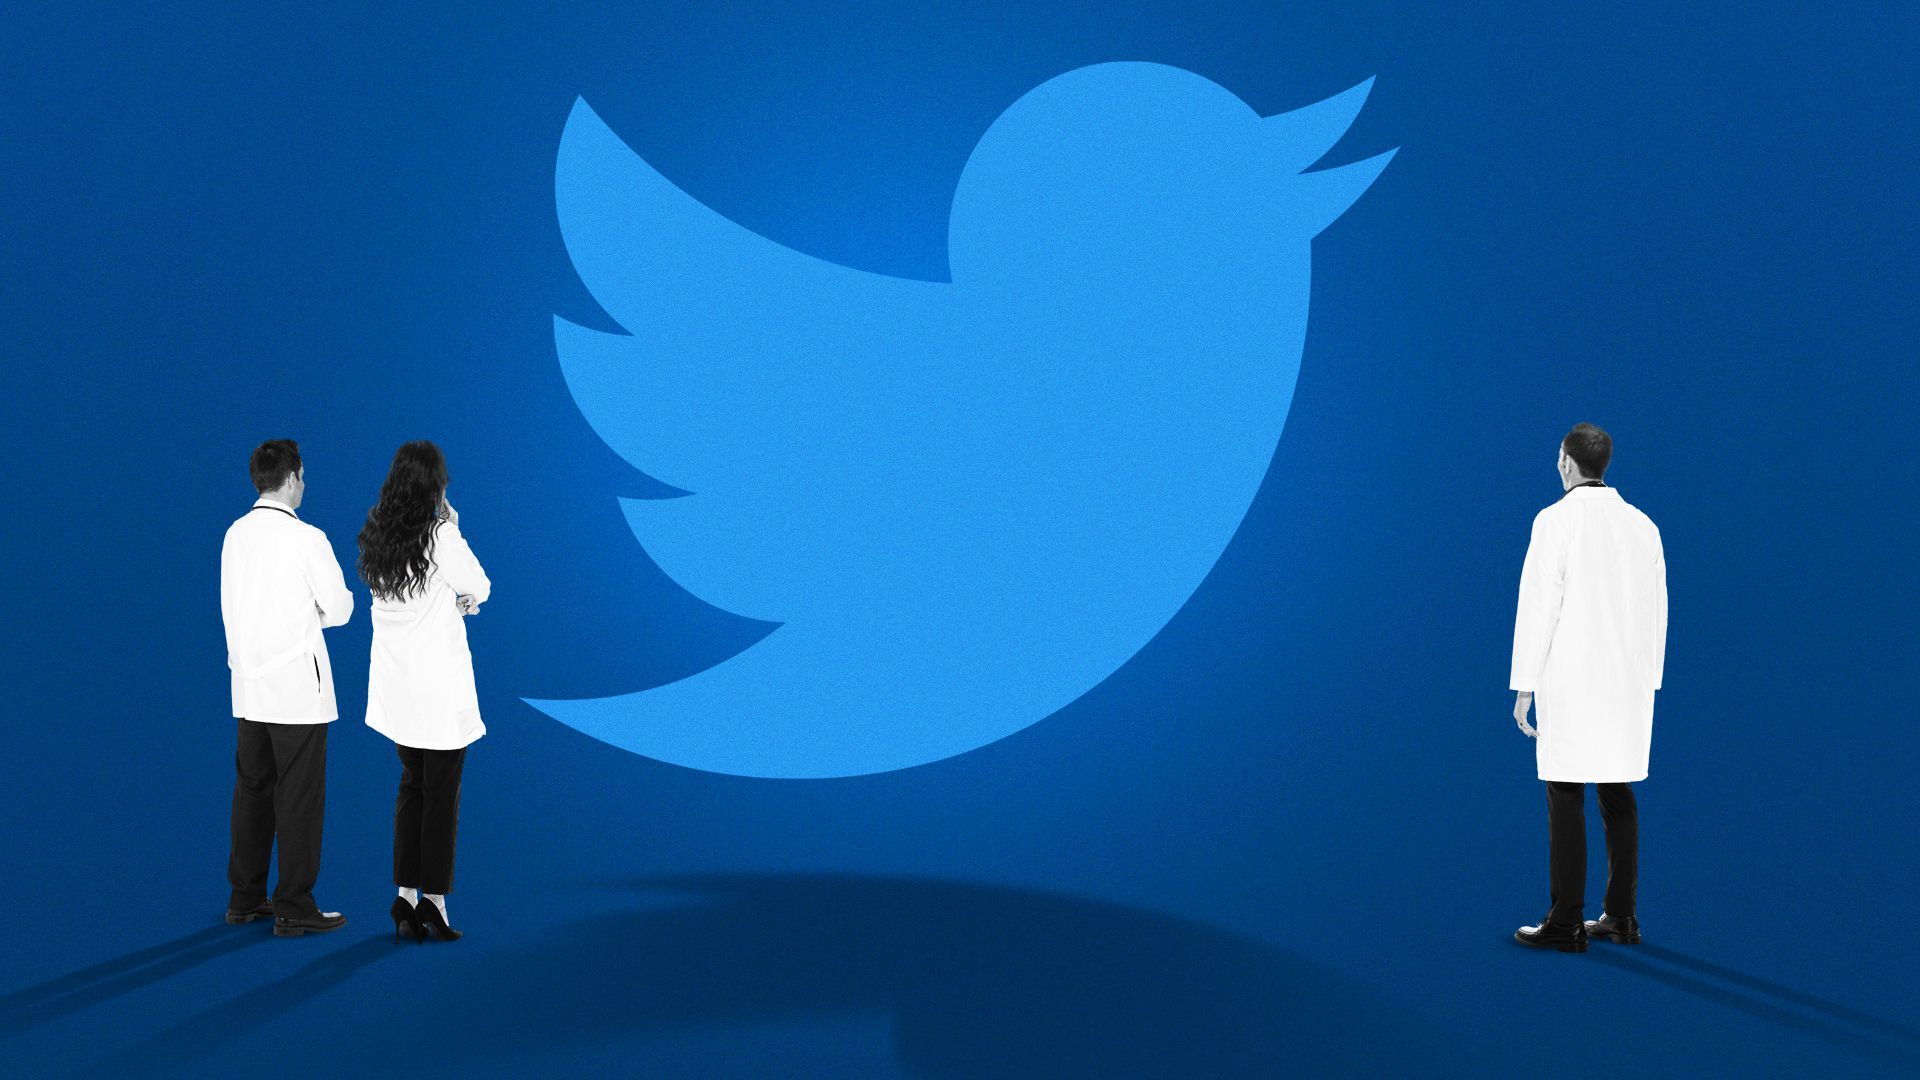 Illustration of scientists studying the twitter logo on a blue background.